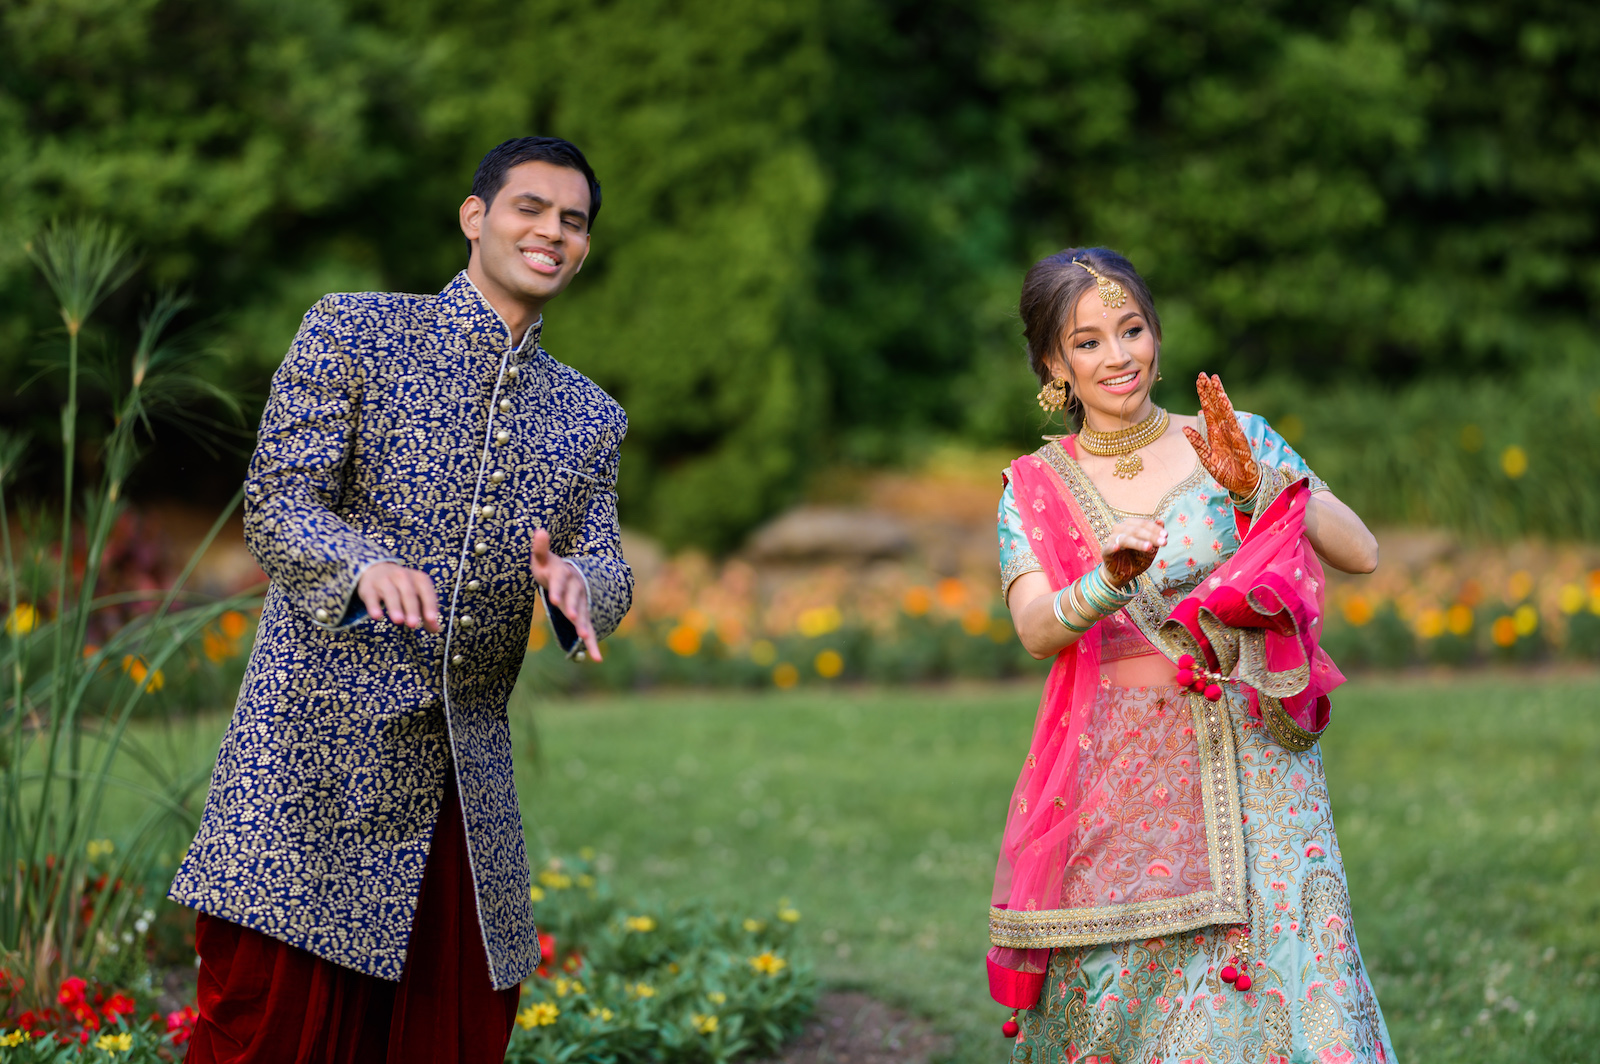 Charming Indian Wedding featured on NBG blog!